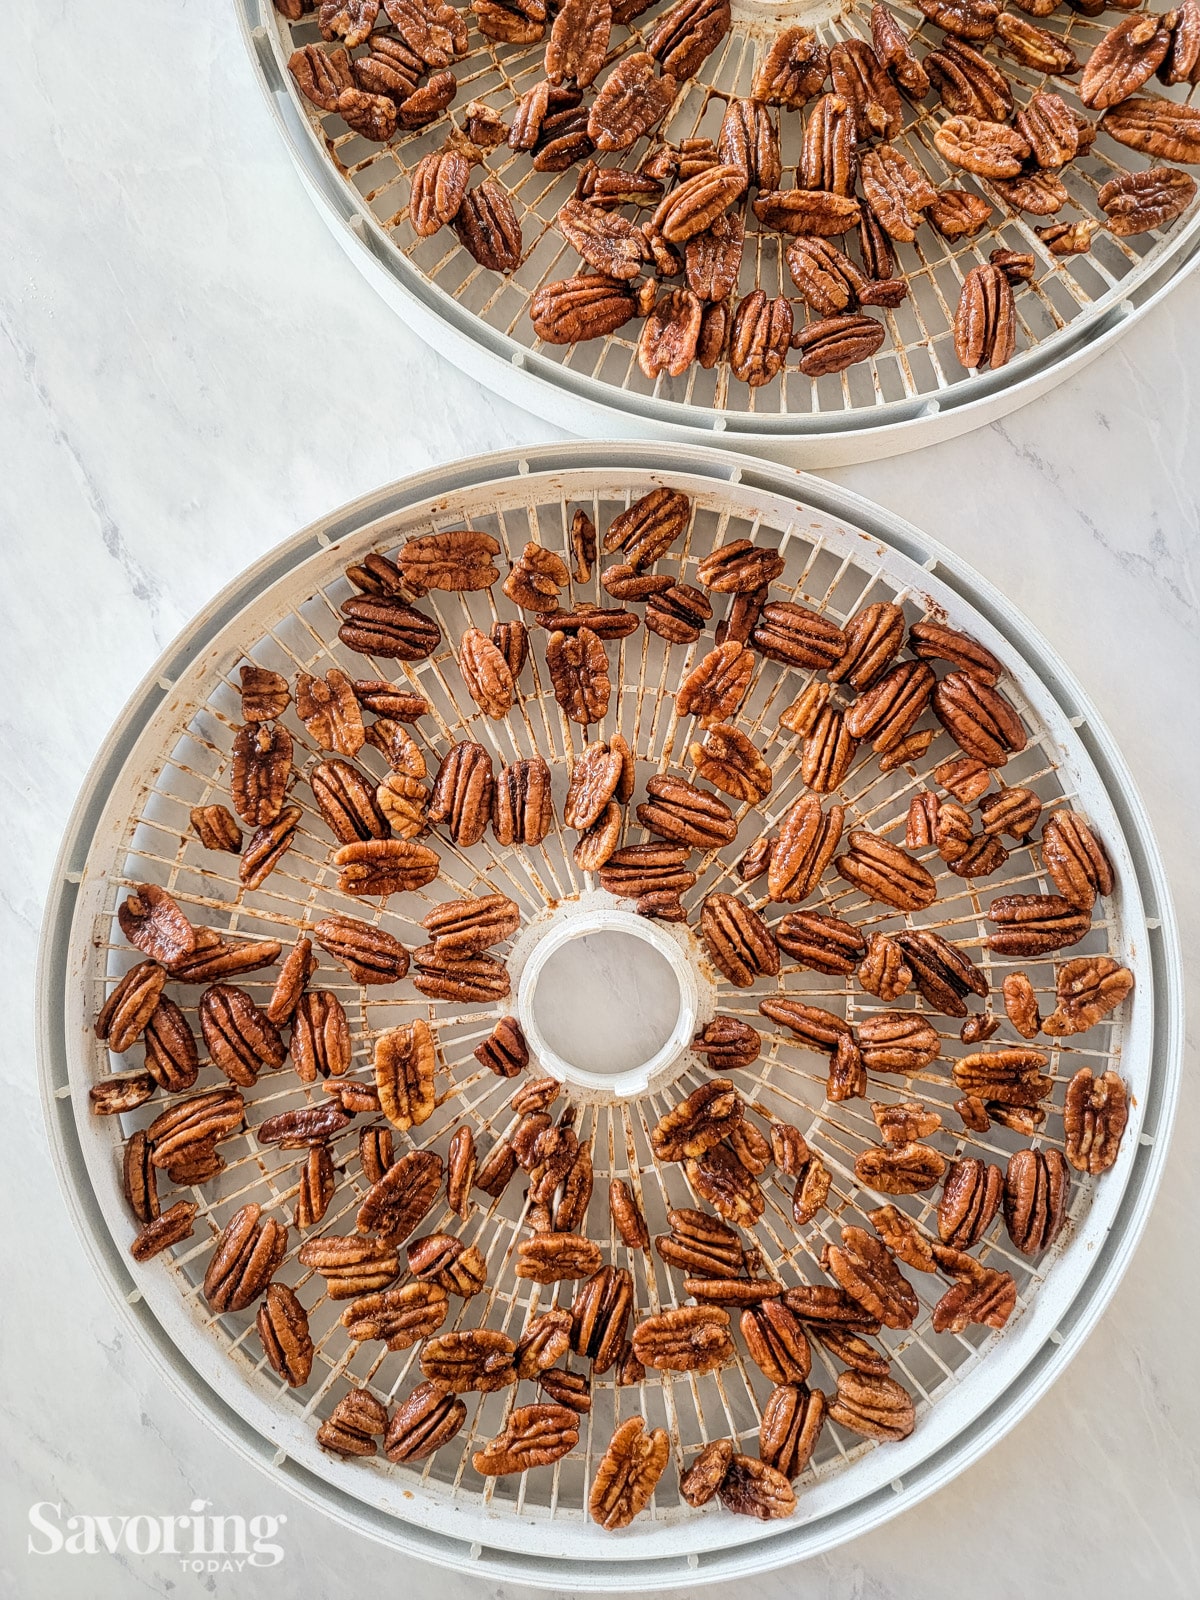 pecans spread out on dehydrator trays